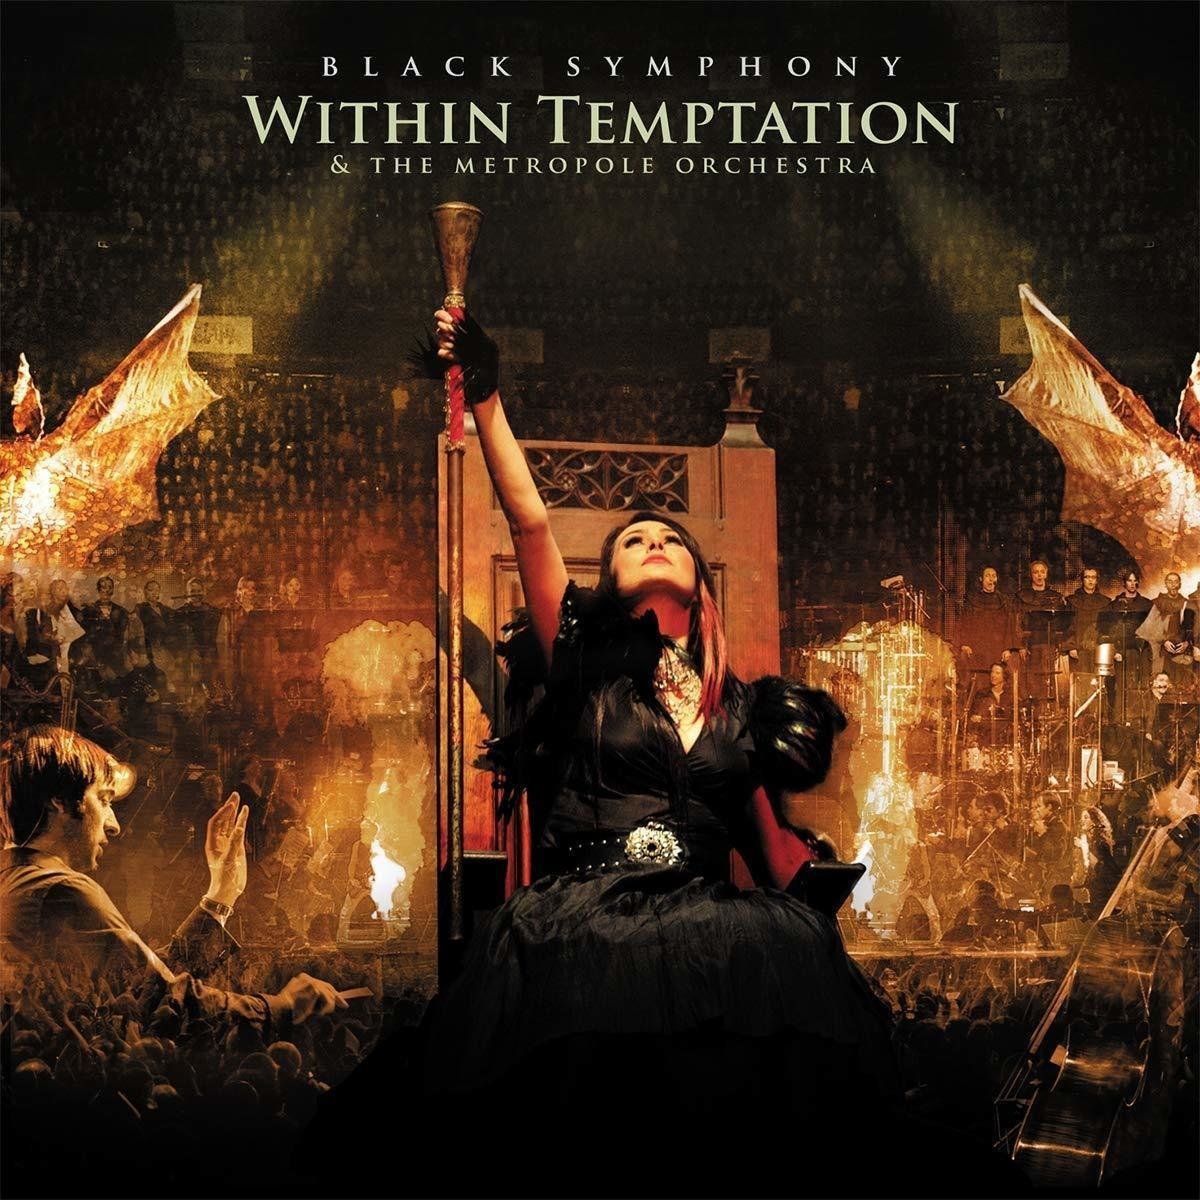 Vinyl Record Within Temptation - Black Symphony (Gold & Red Marbled Coloured) (Gatefold Sleeve) (3 LP)